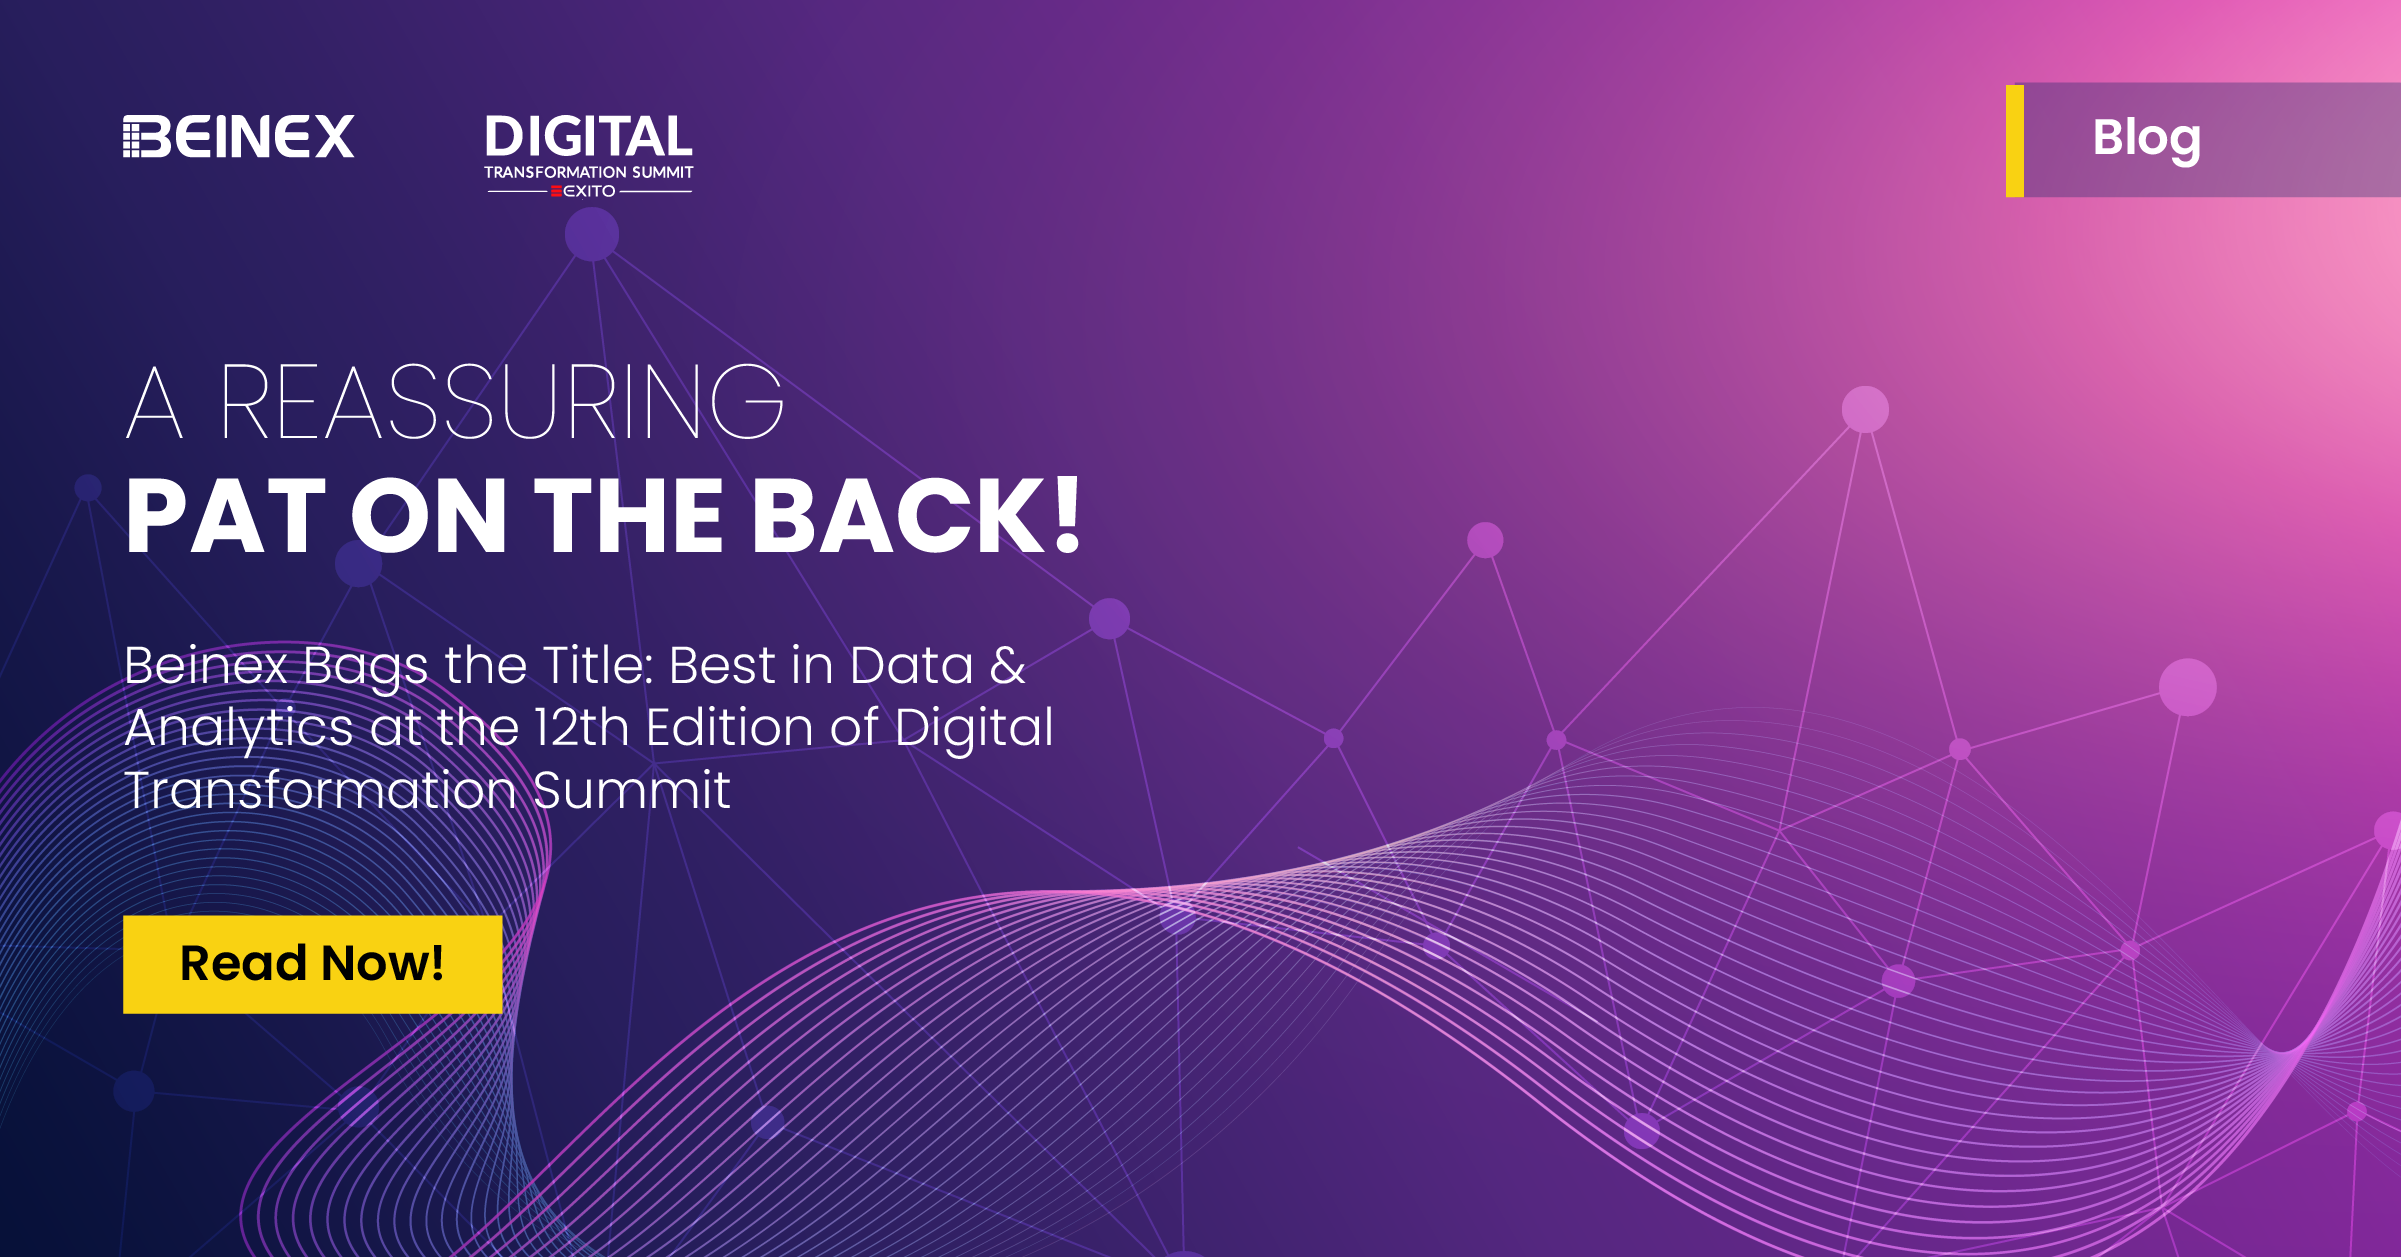 Beinex Bags the Title: Best in Data & Analytics at the 12th Edition of Digital Transformation Summit, UAE